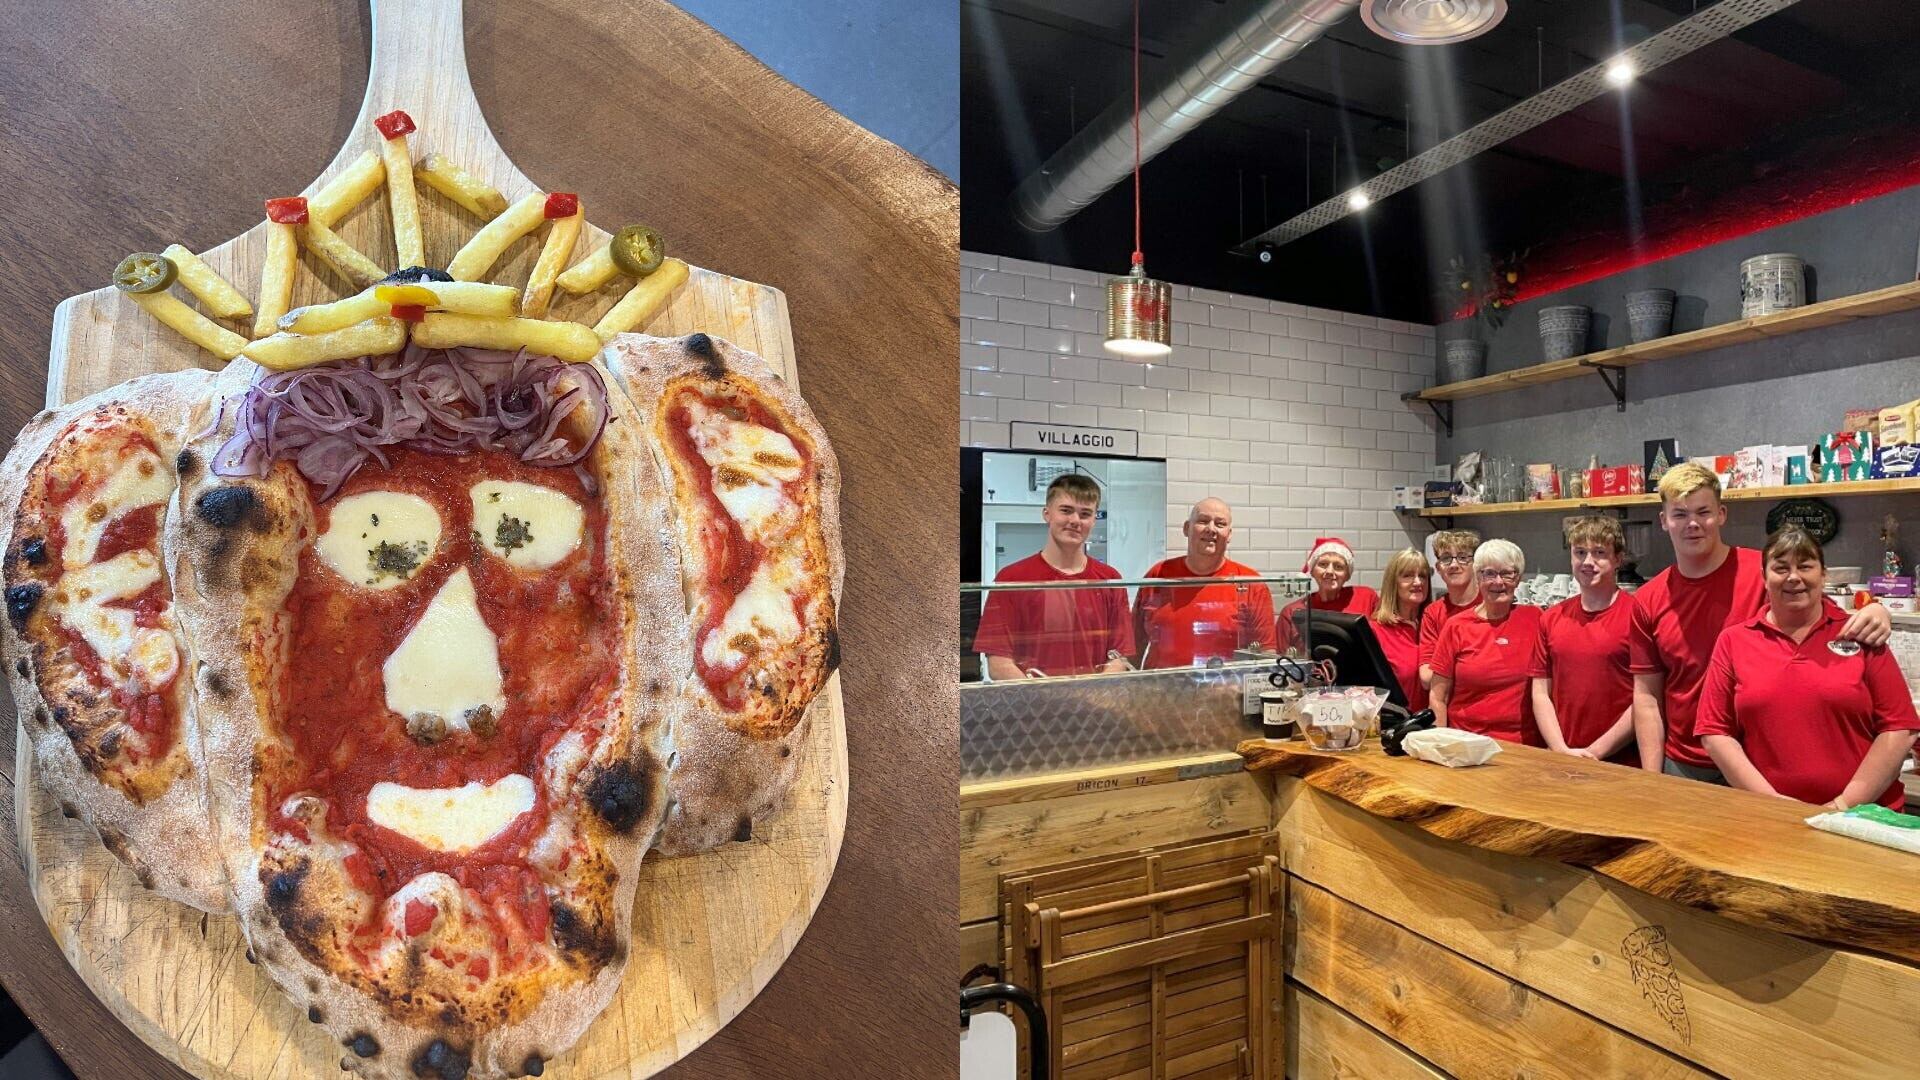 Creator Gerry Sweeney said the pizza is ‘silly’ but has brought a smile to many in the local community.